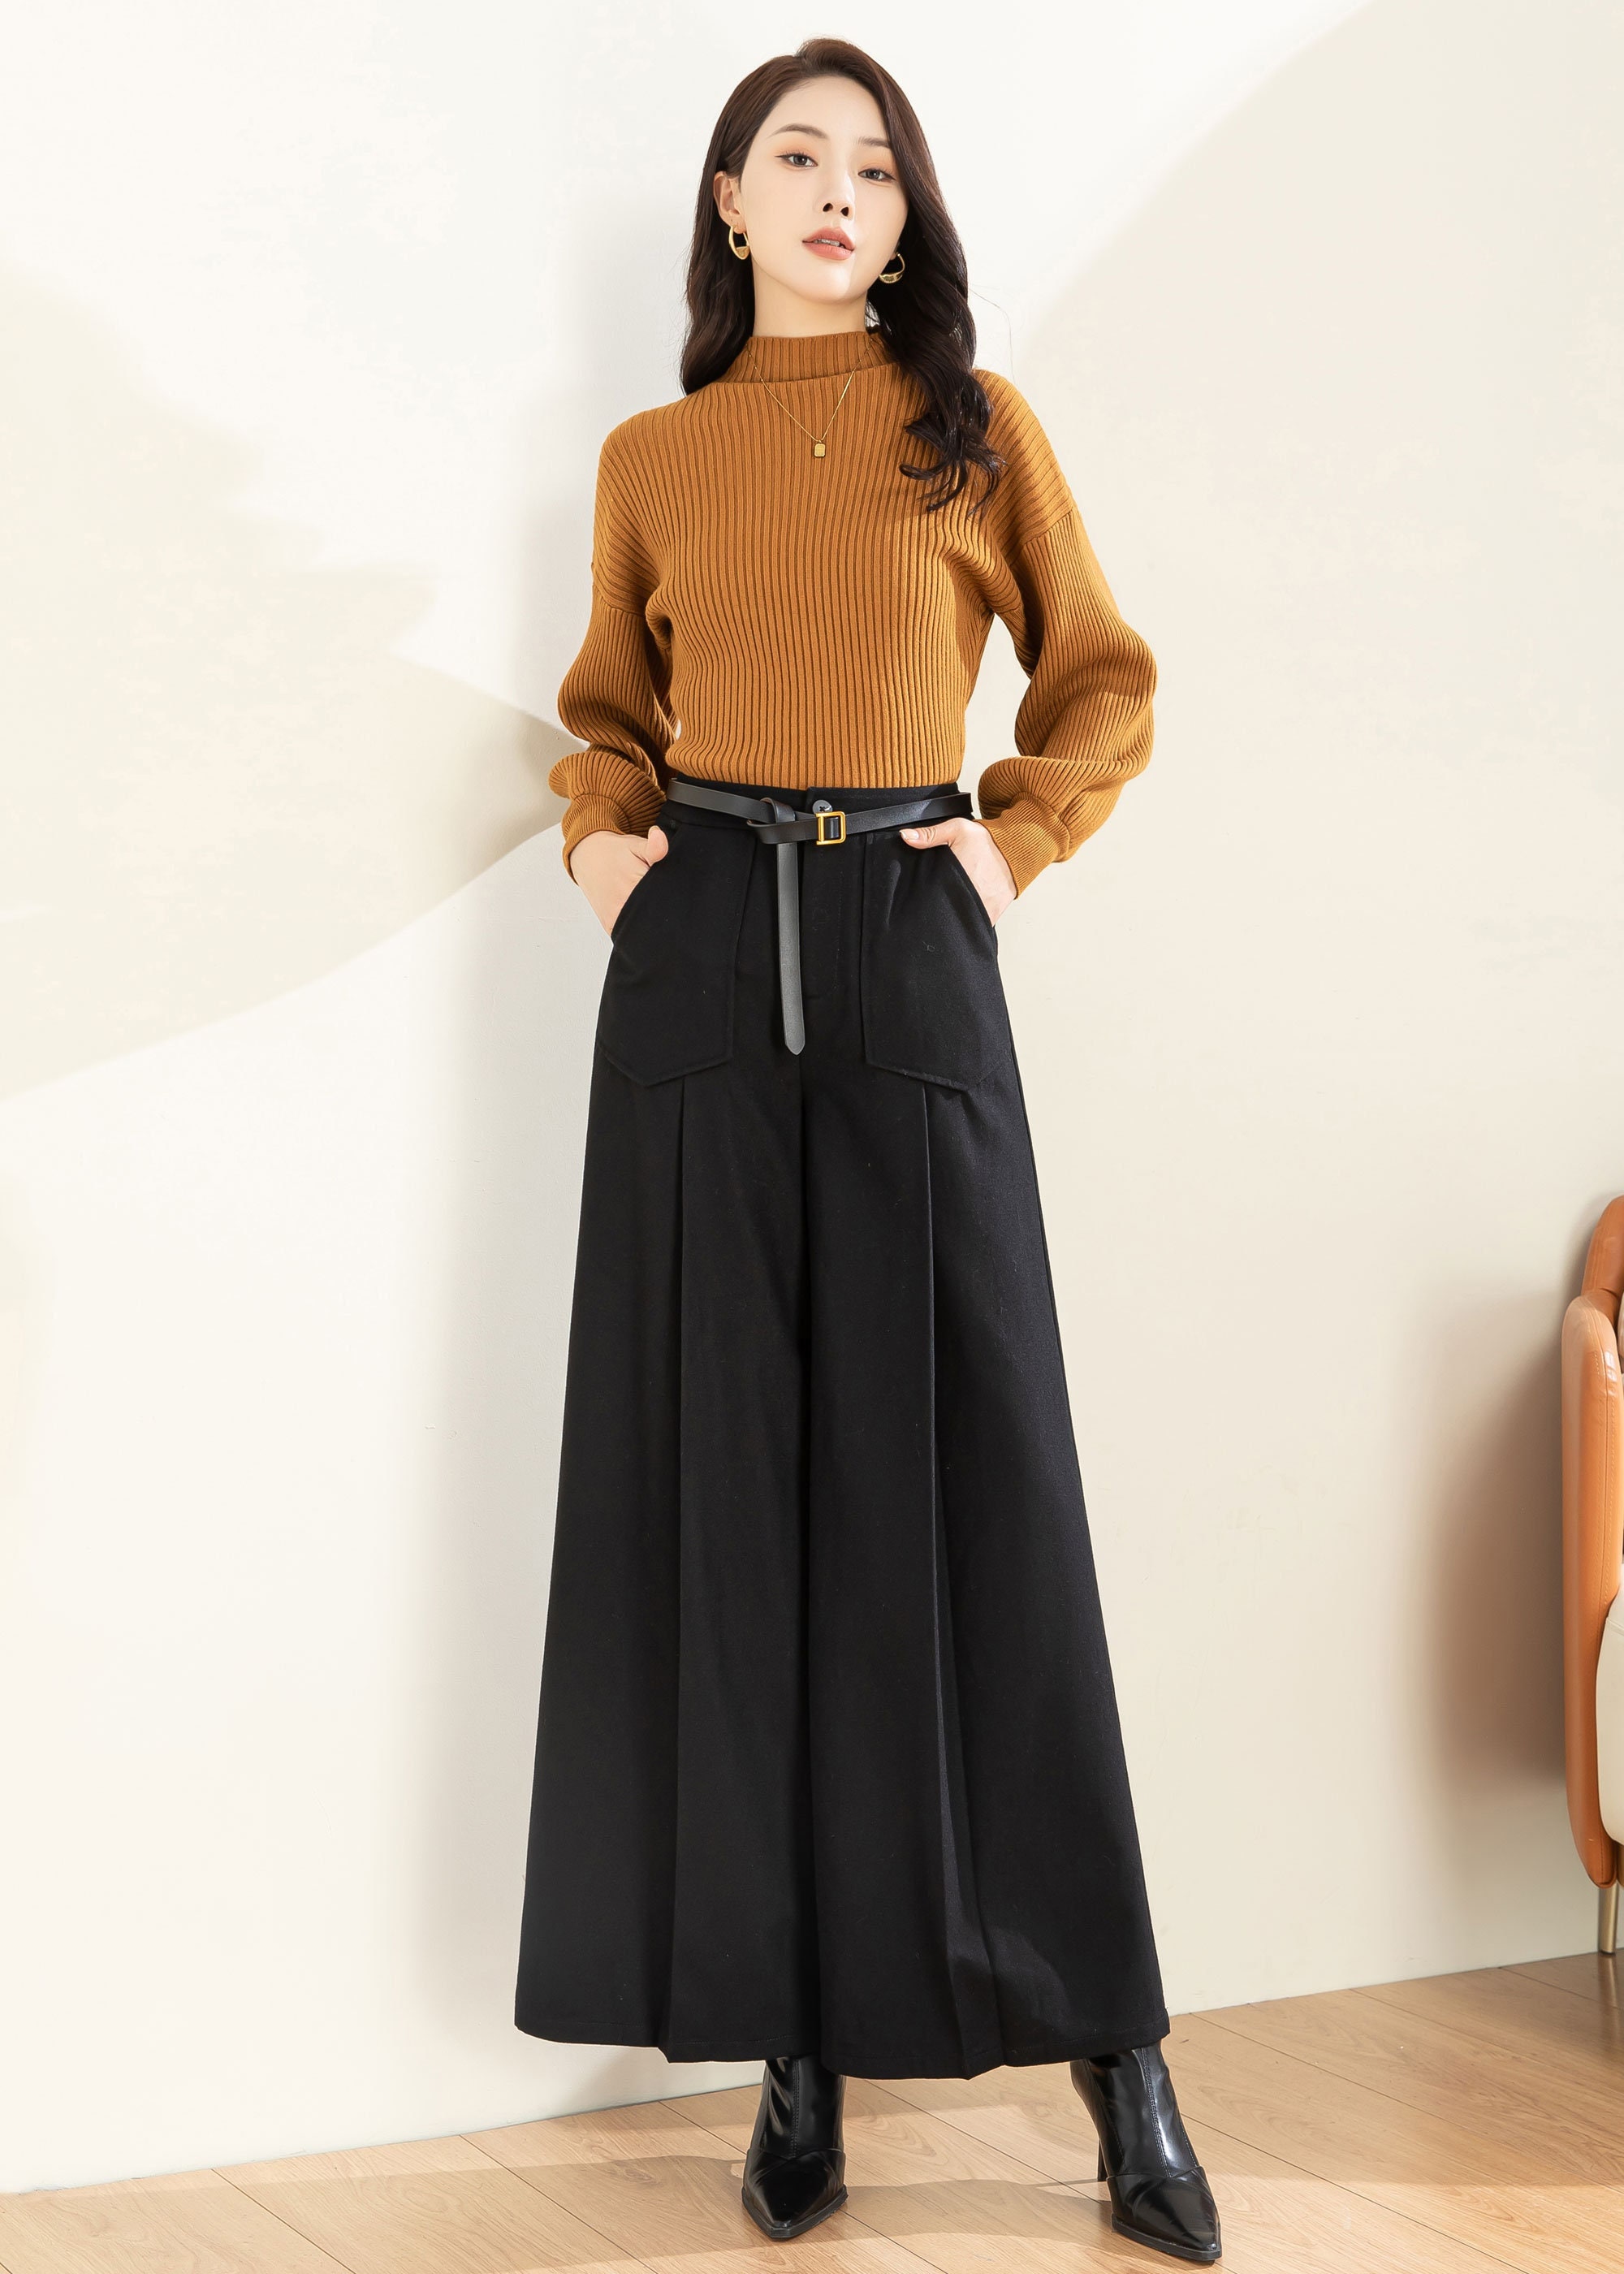 Black Wool Knit Trousers for Women and Men